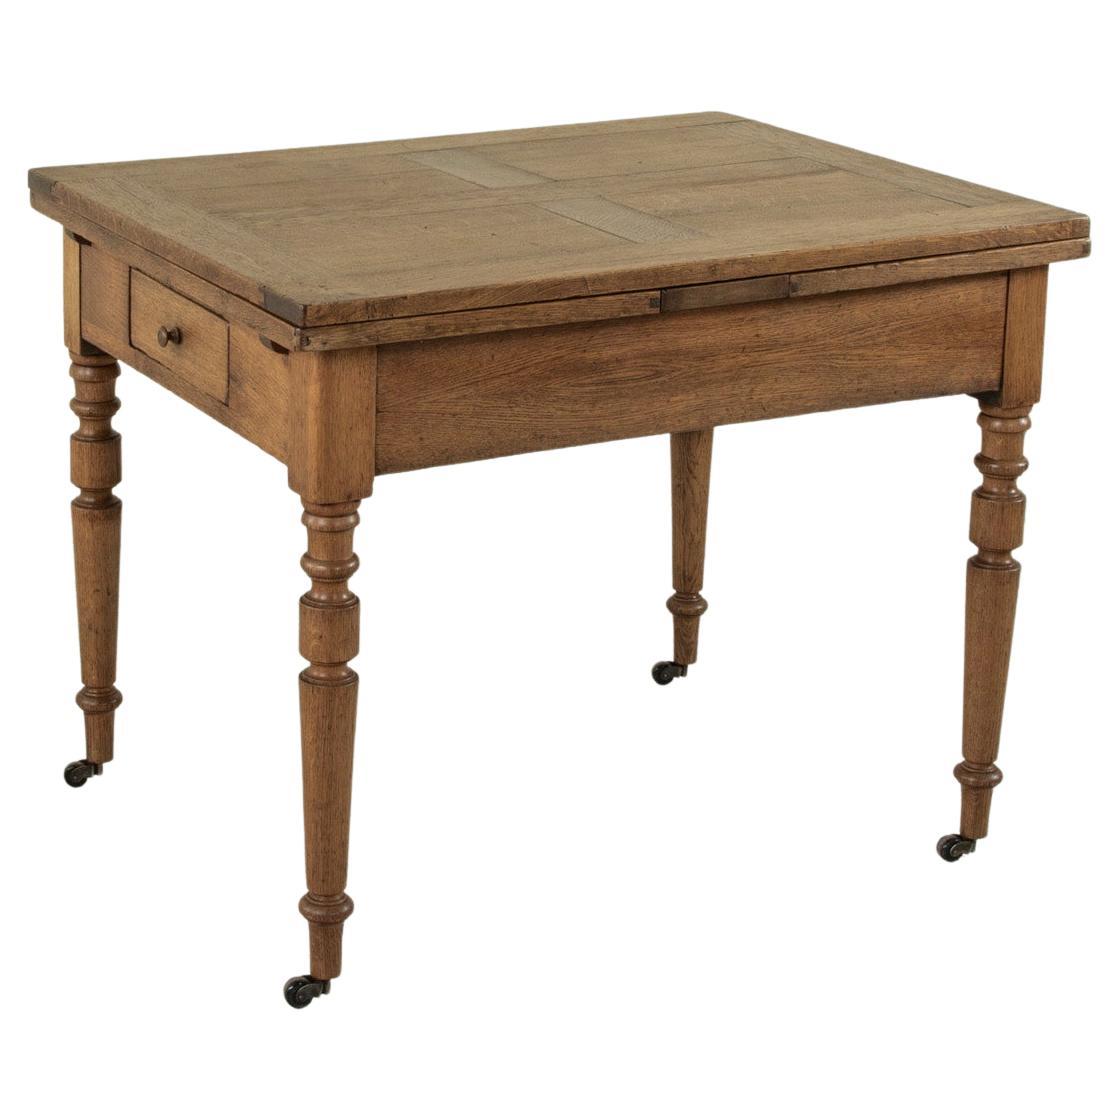 Late 19th Century French Oak Farm Table on Casters with Extendable Leaves